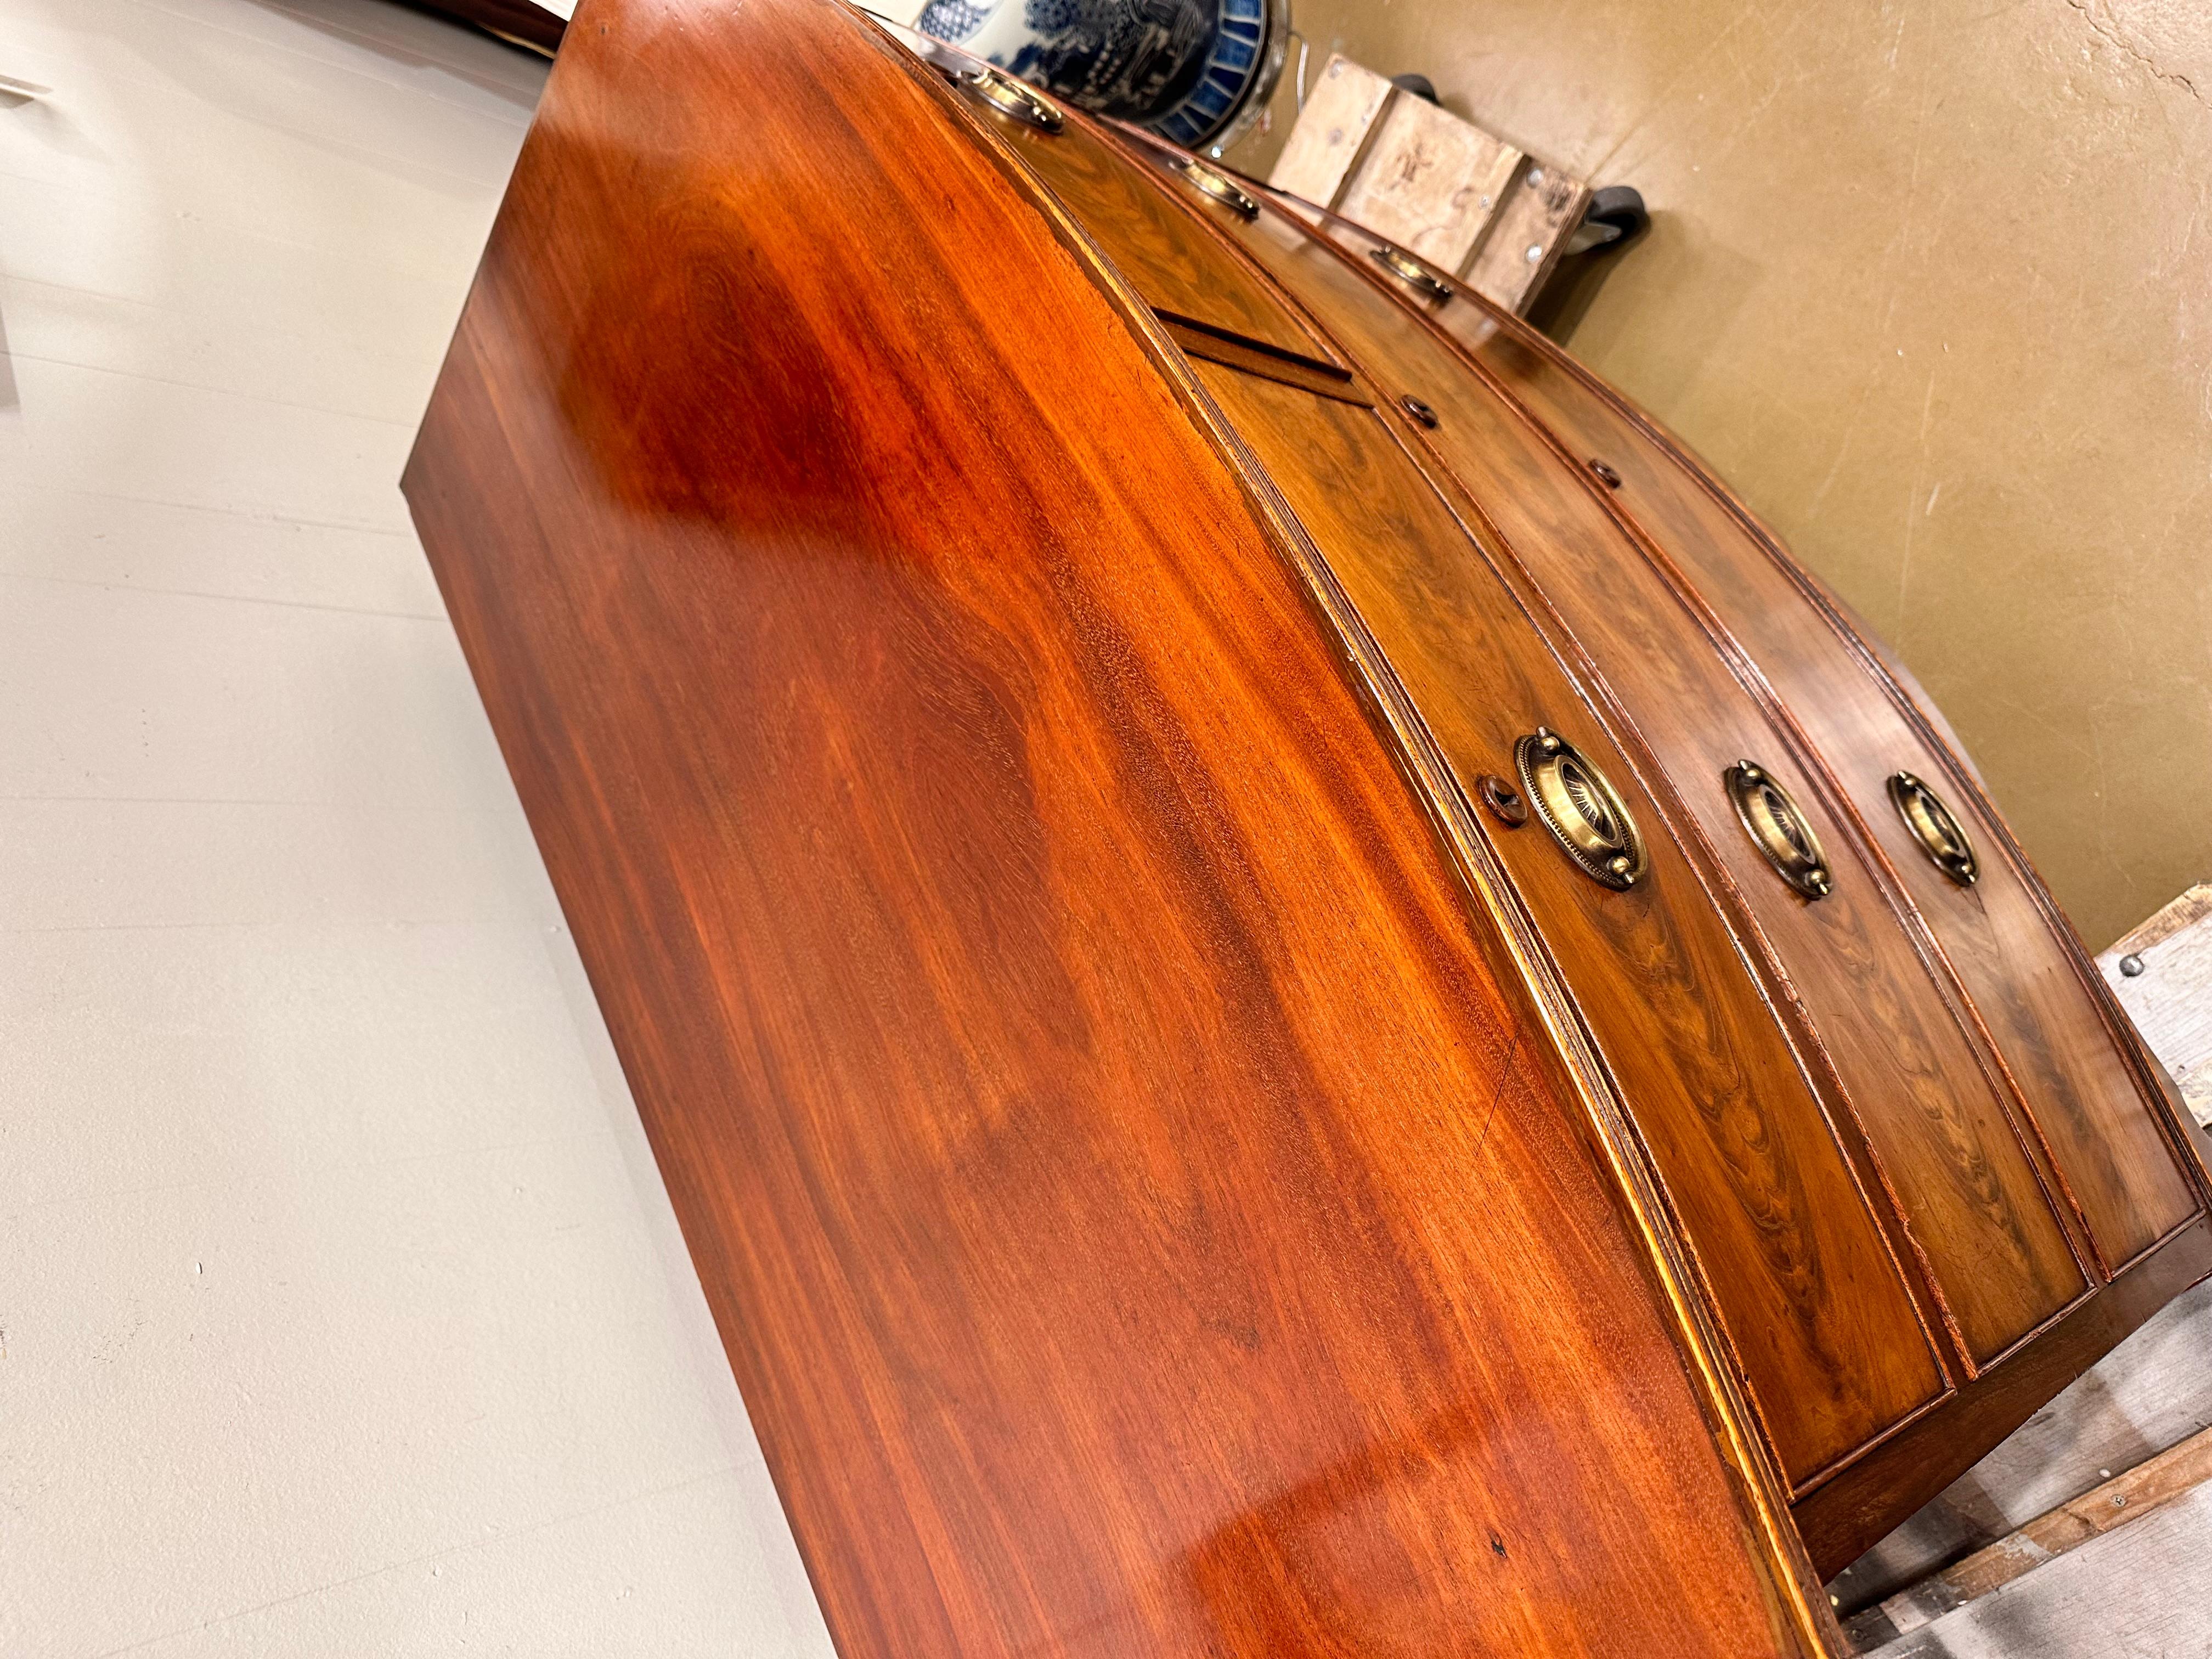 This is a beautiful 19th century English bow front chest. The condition is excellent with no repairs no perviously broken legs the drawers are in perfect condition and slide perfectly. Not to mention the color and the amazing French polish. This is